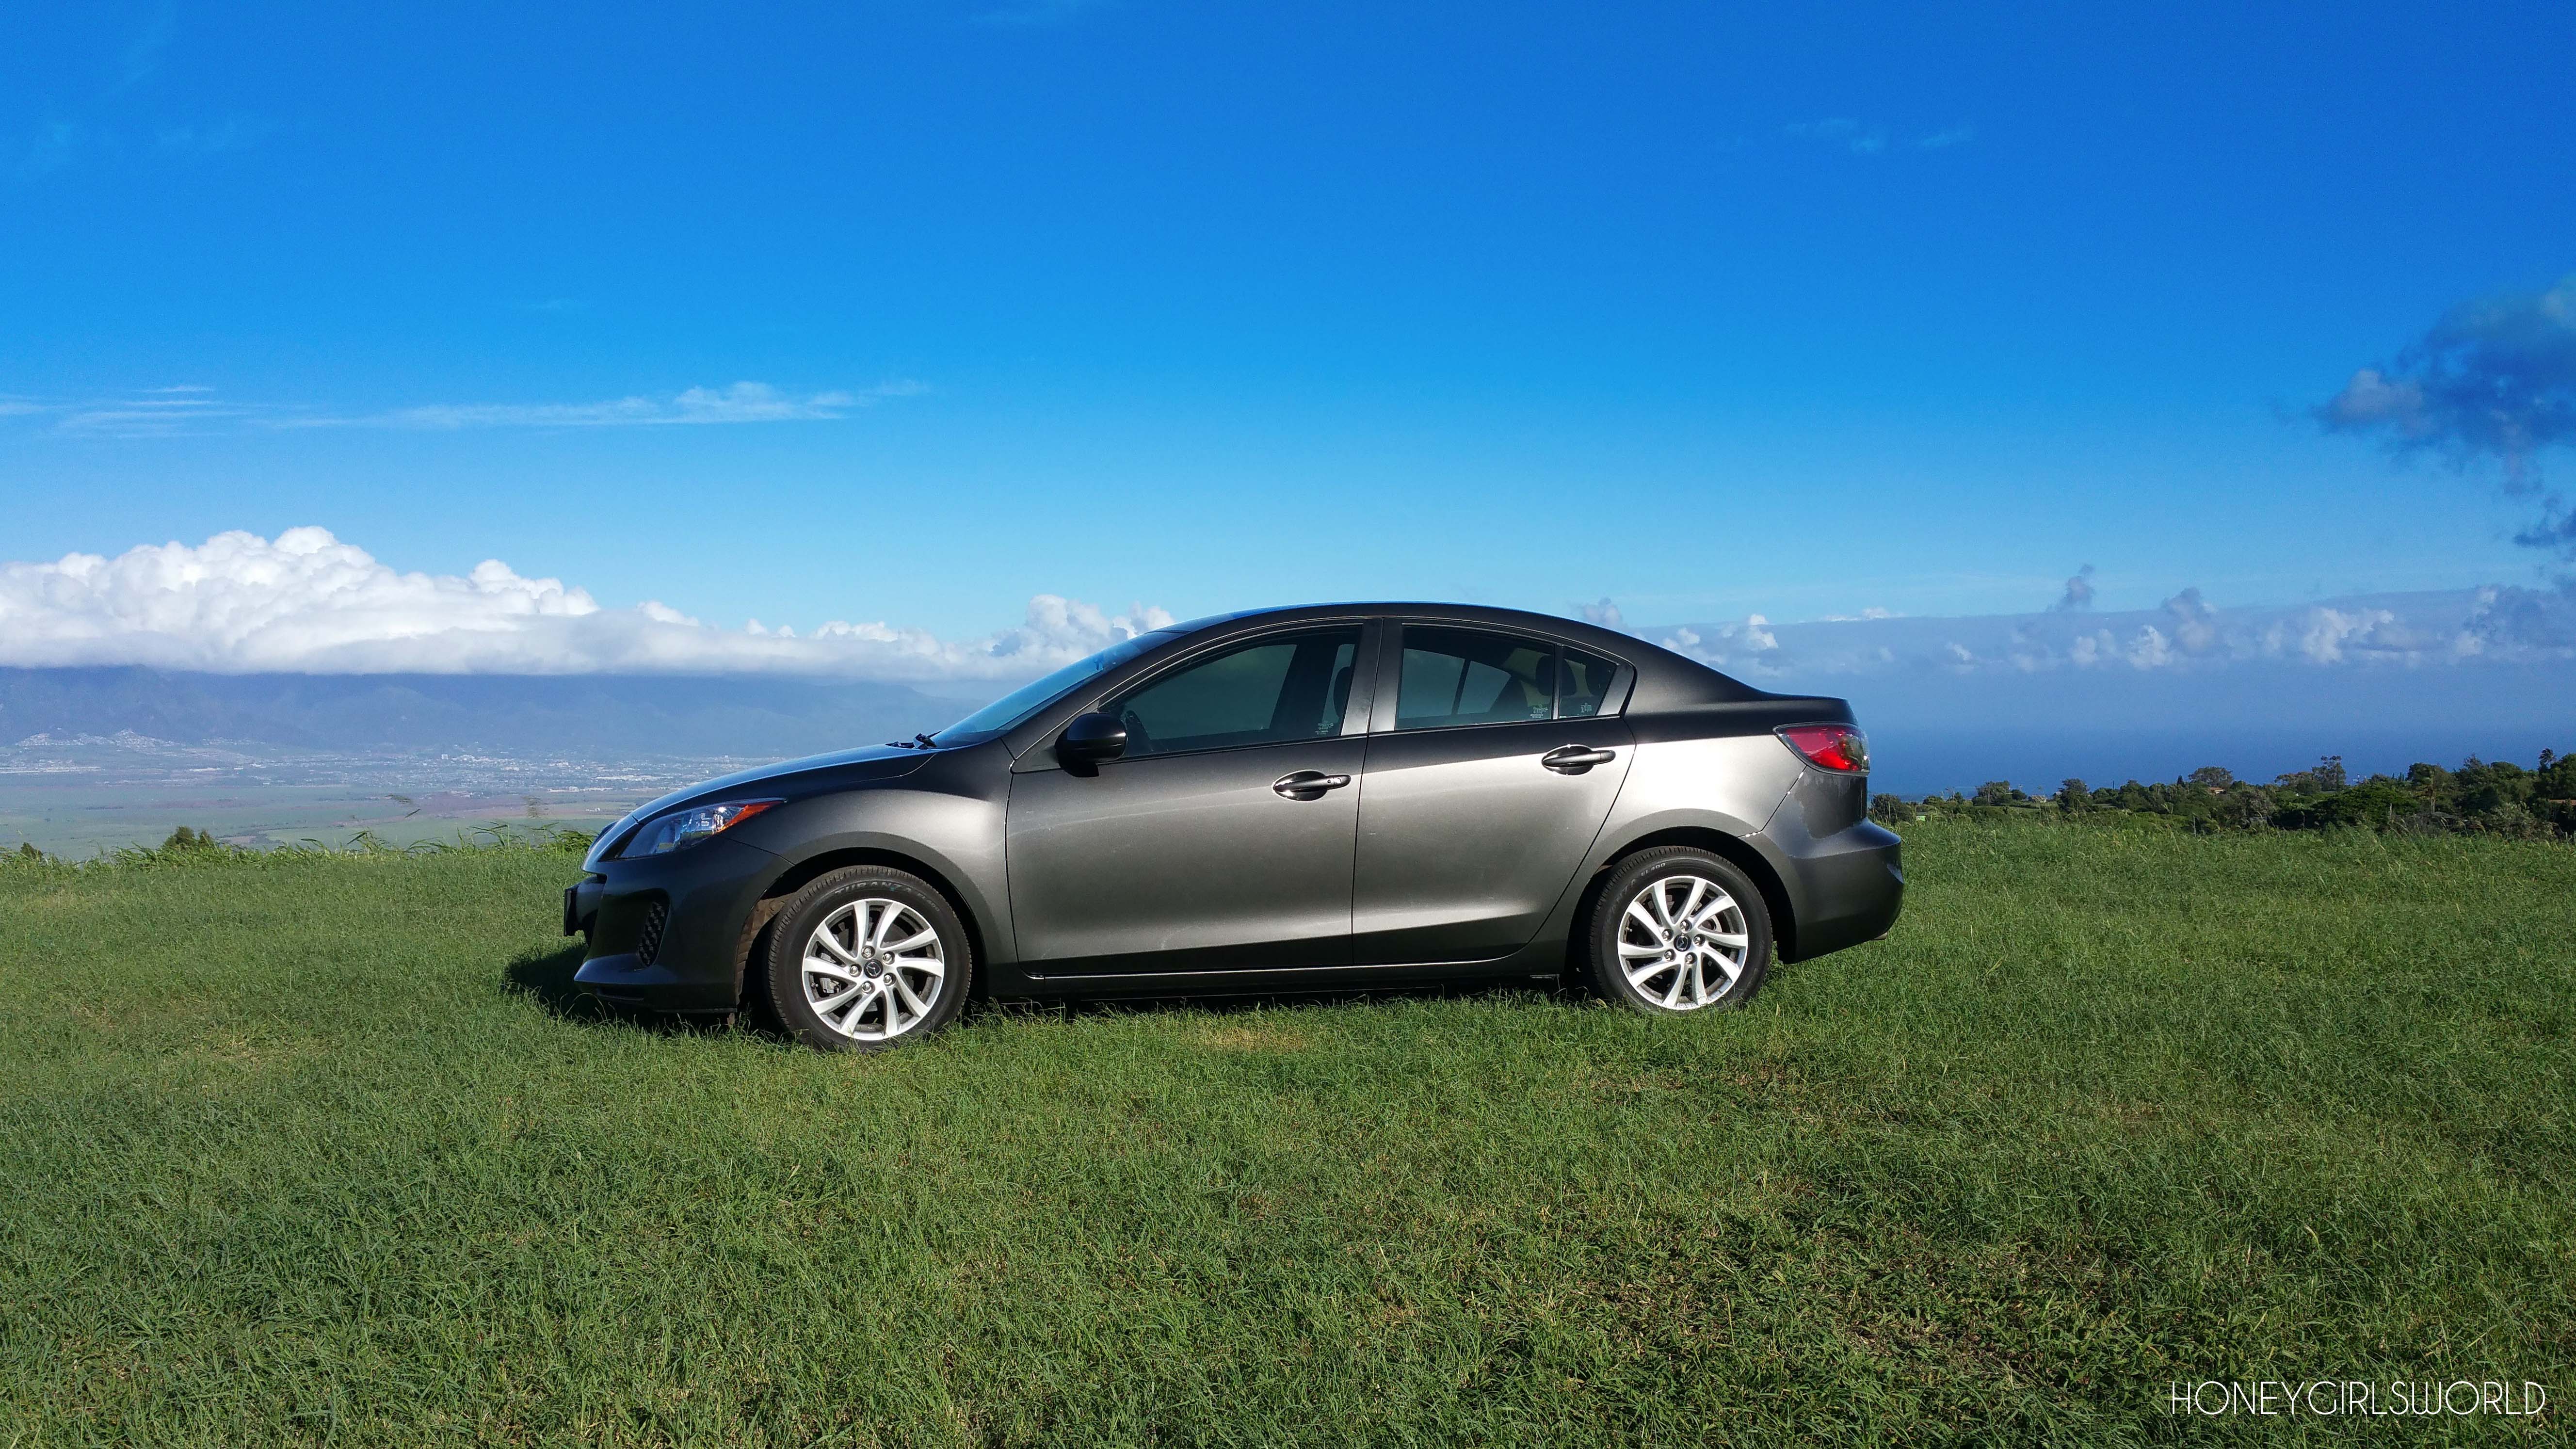 From a Large Car to a Compact - Buying a Car With Aloha Kia Maui